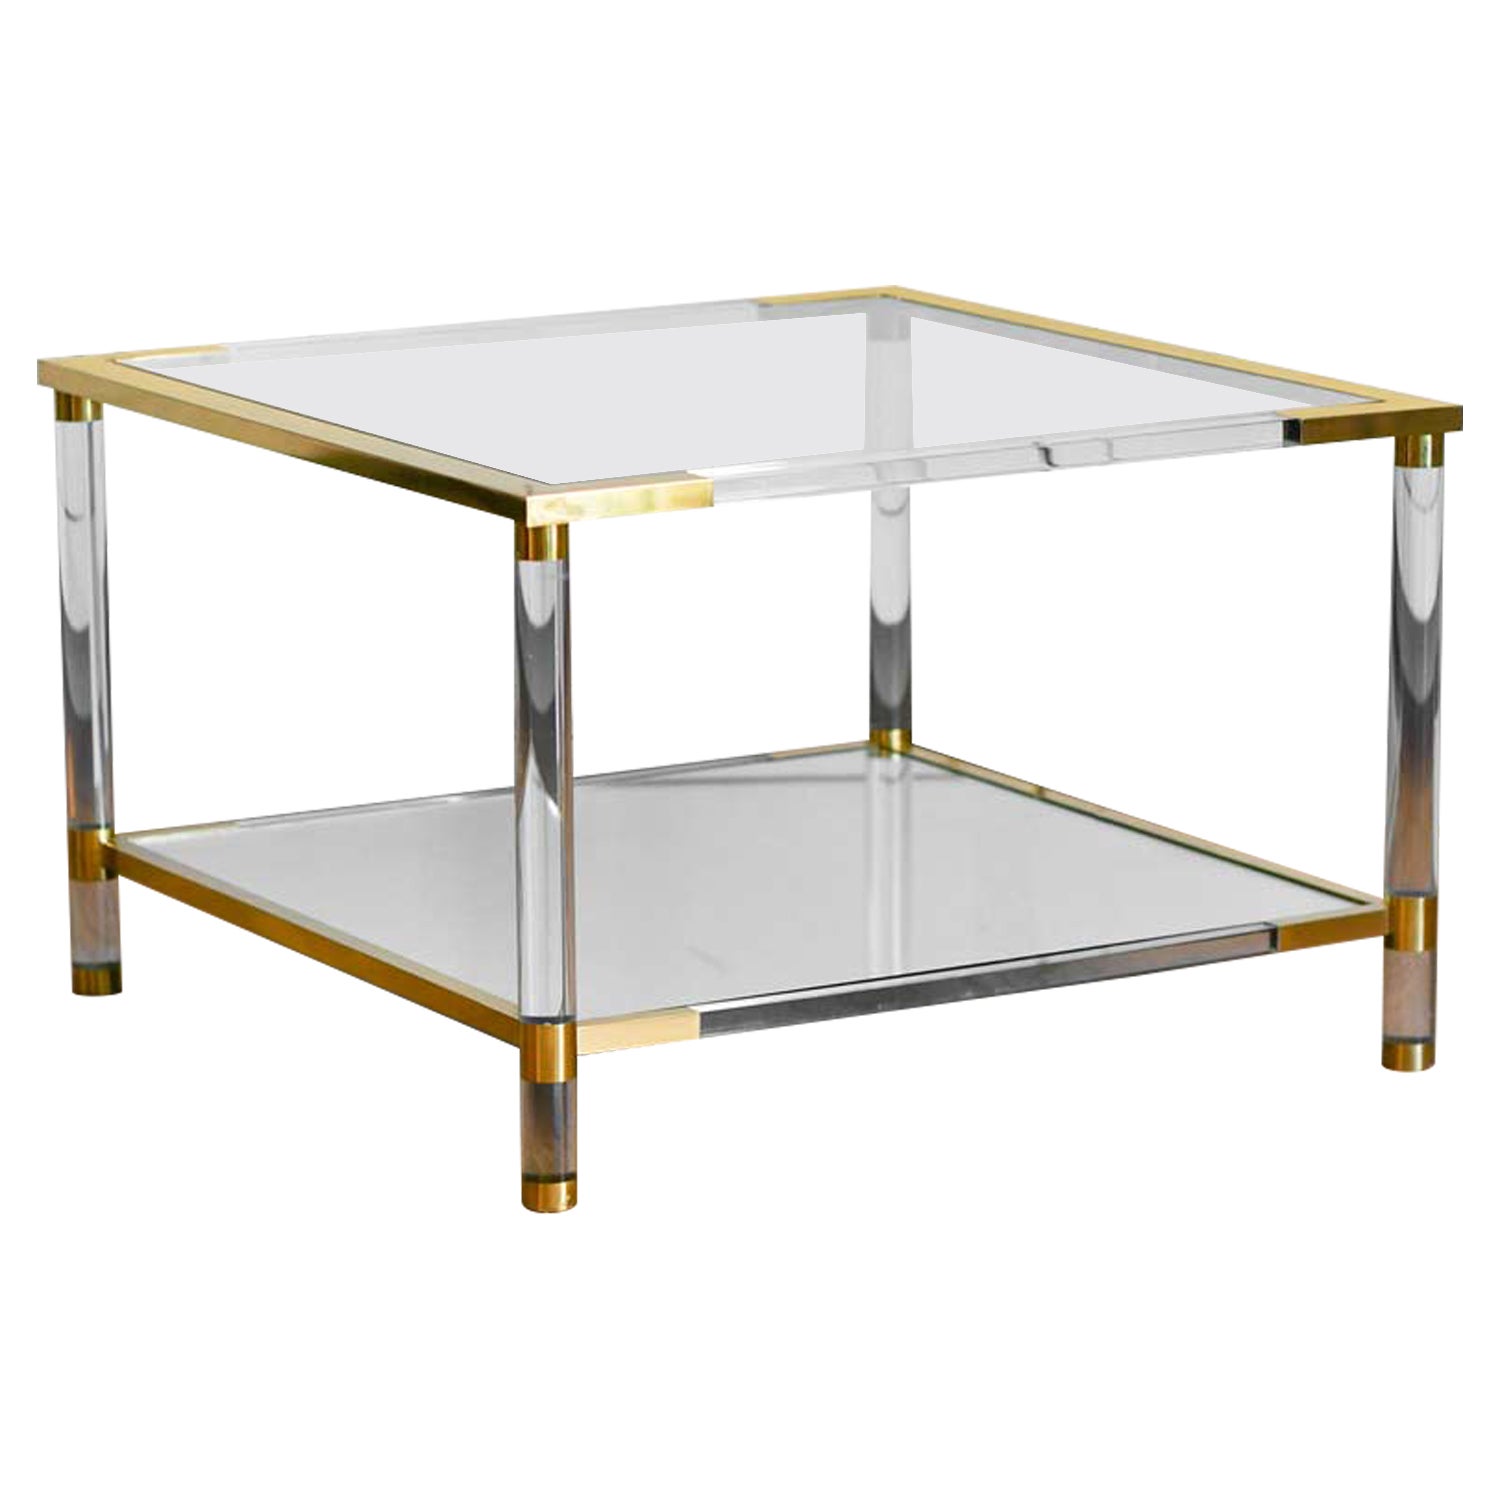 Coffee table in glass, mirrored glass, methacrylate and brass. 